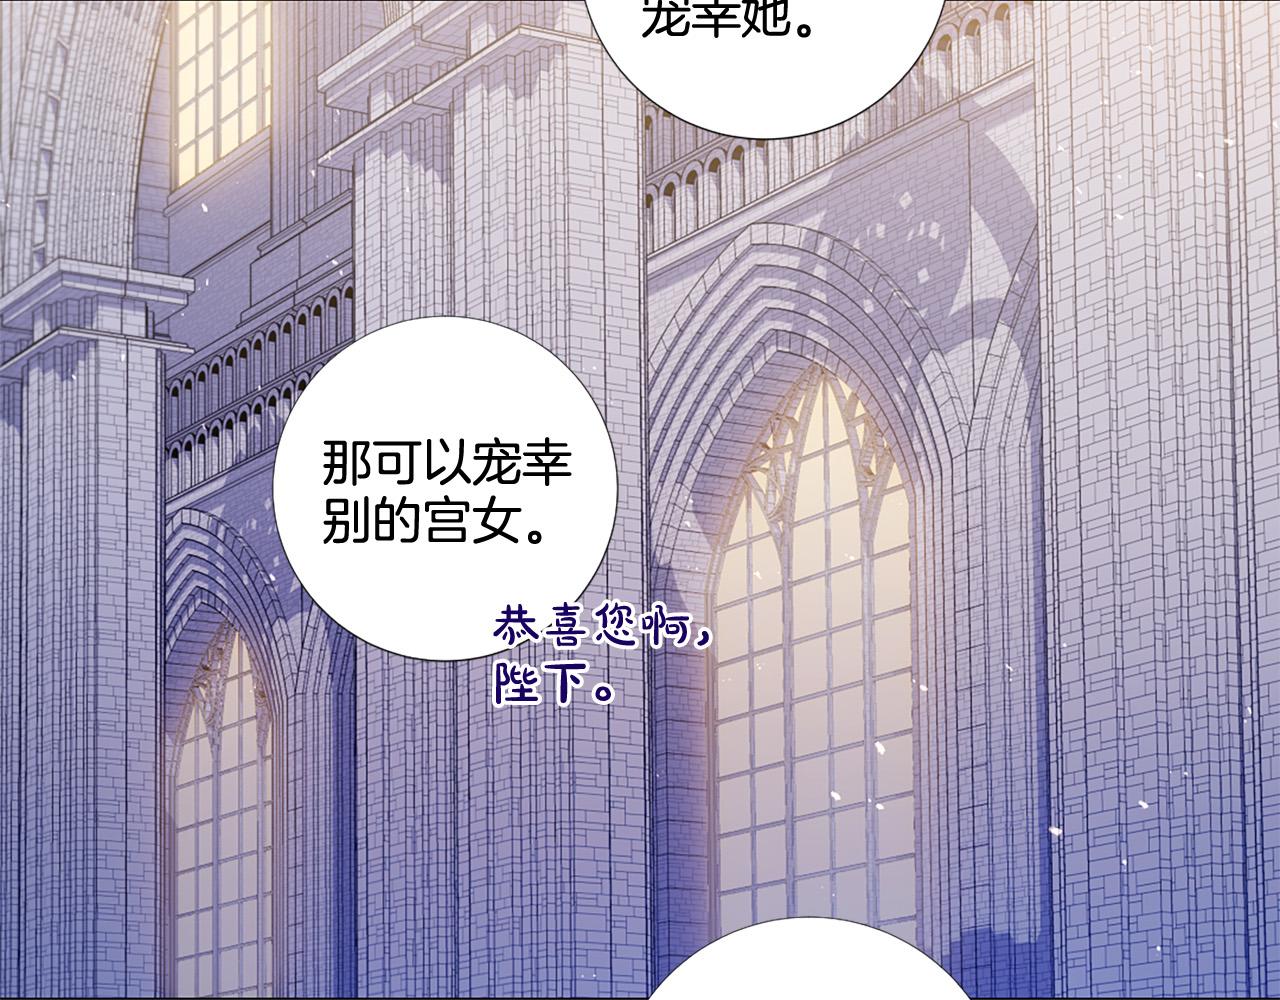 Lady to Queen-勝者爲後 - 第73話 圓房(1/3) - 1